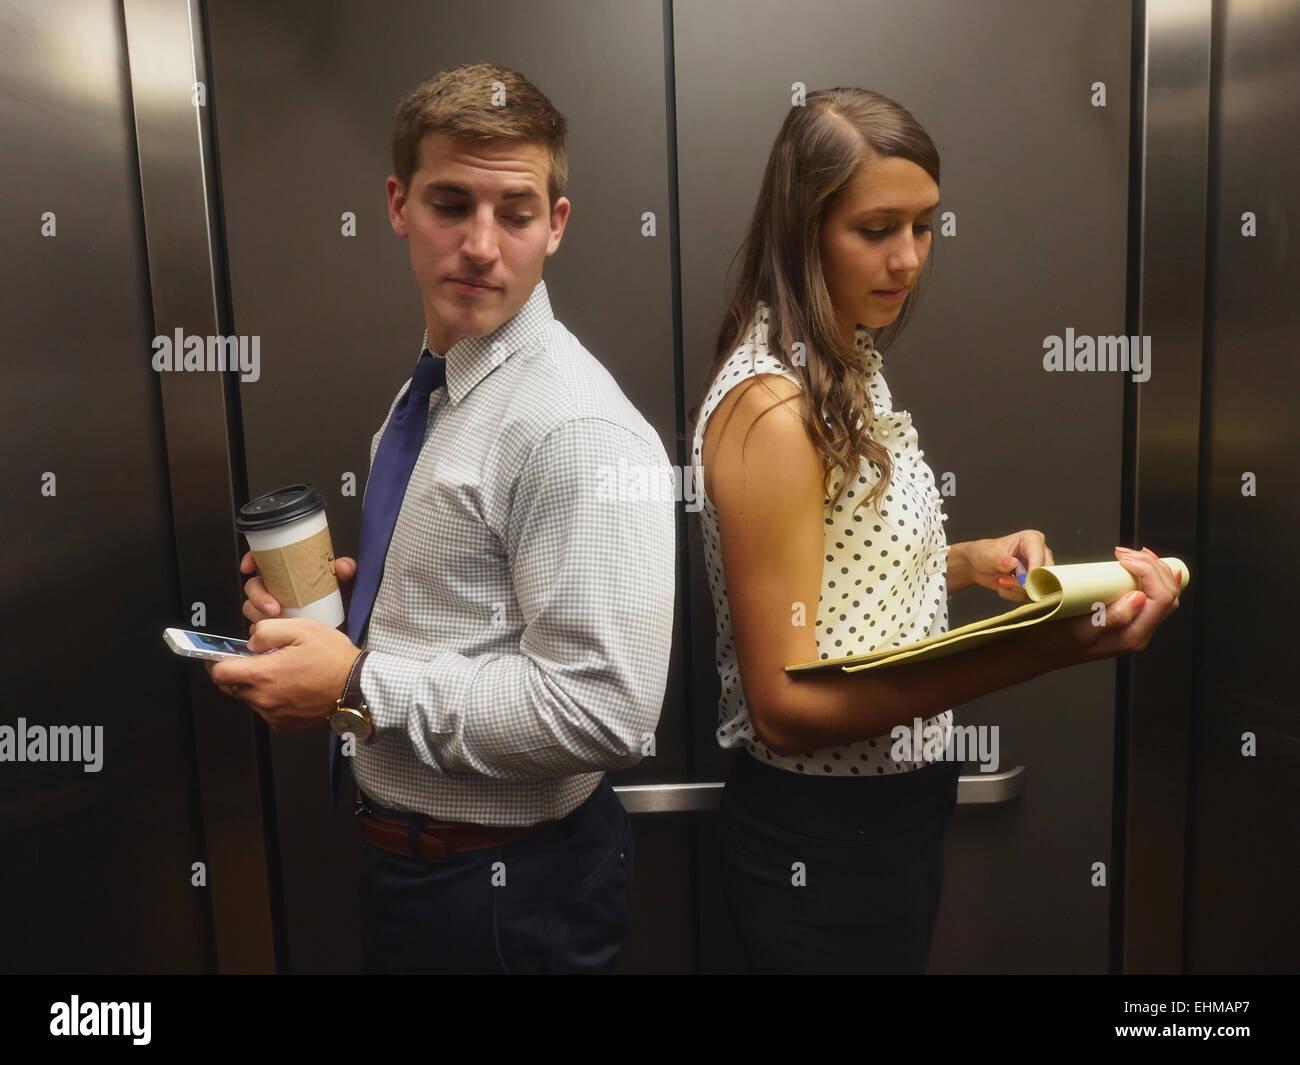 Business people ignoring each other in elevator Stock Photo